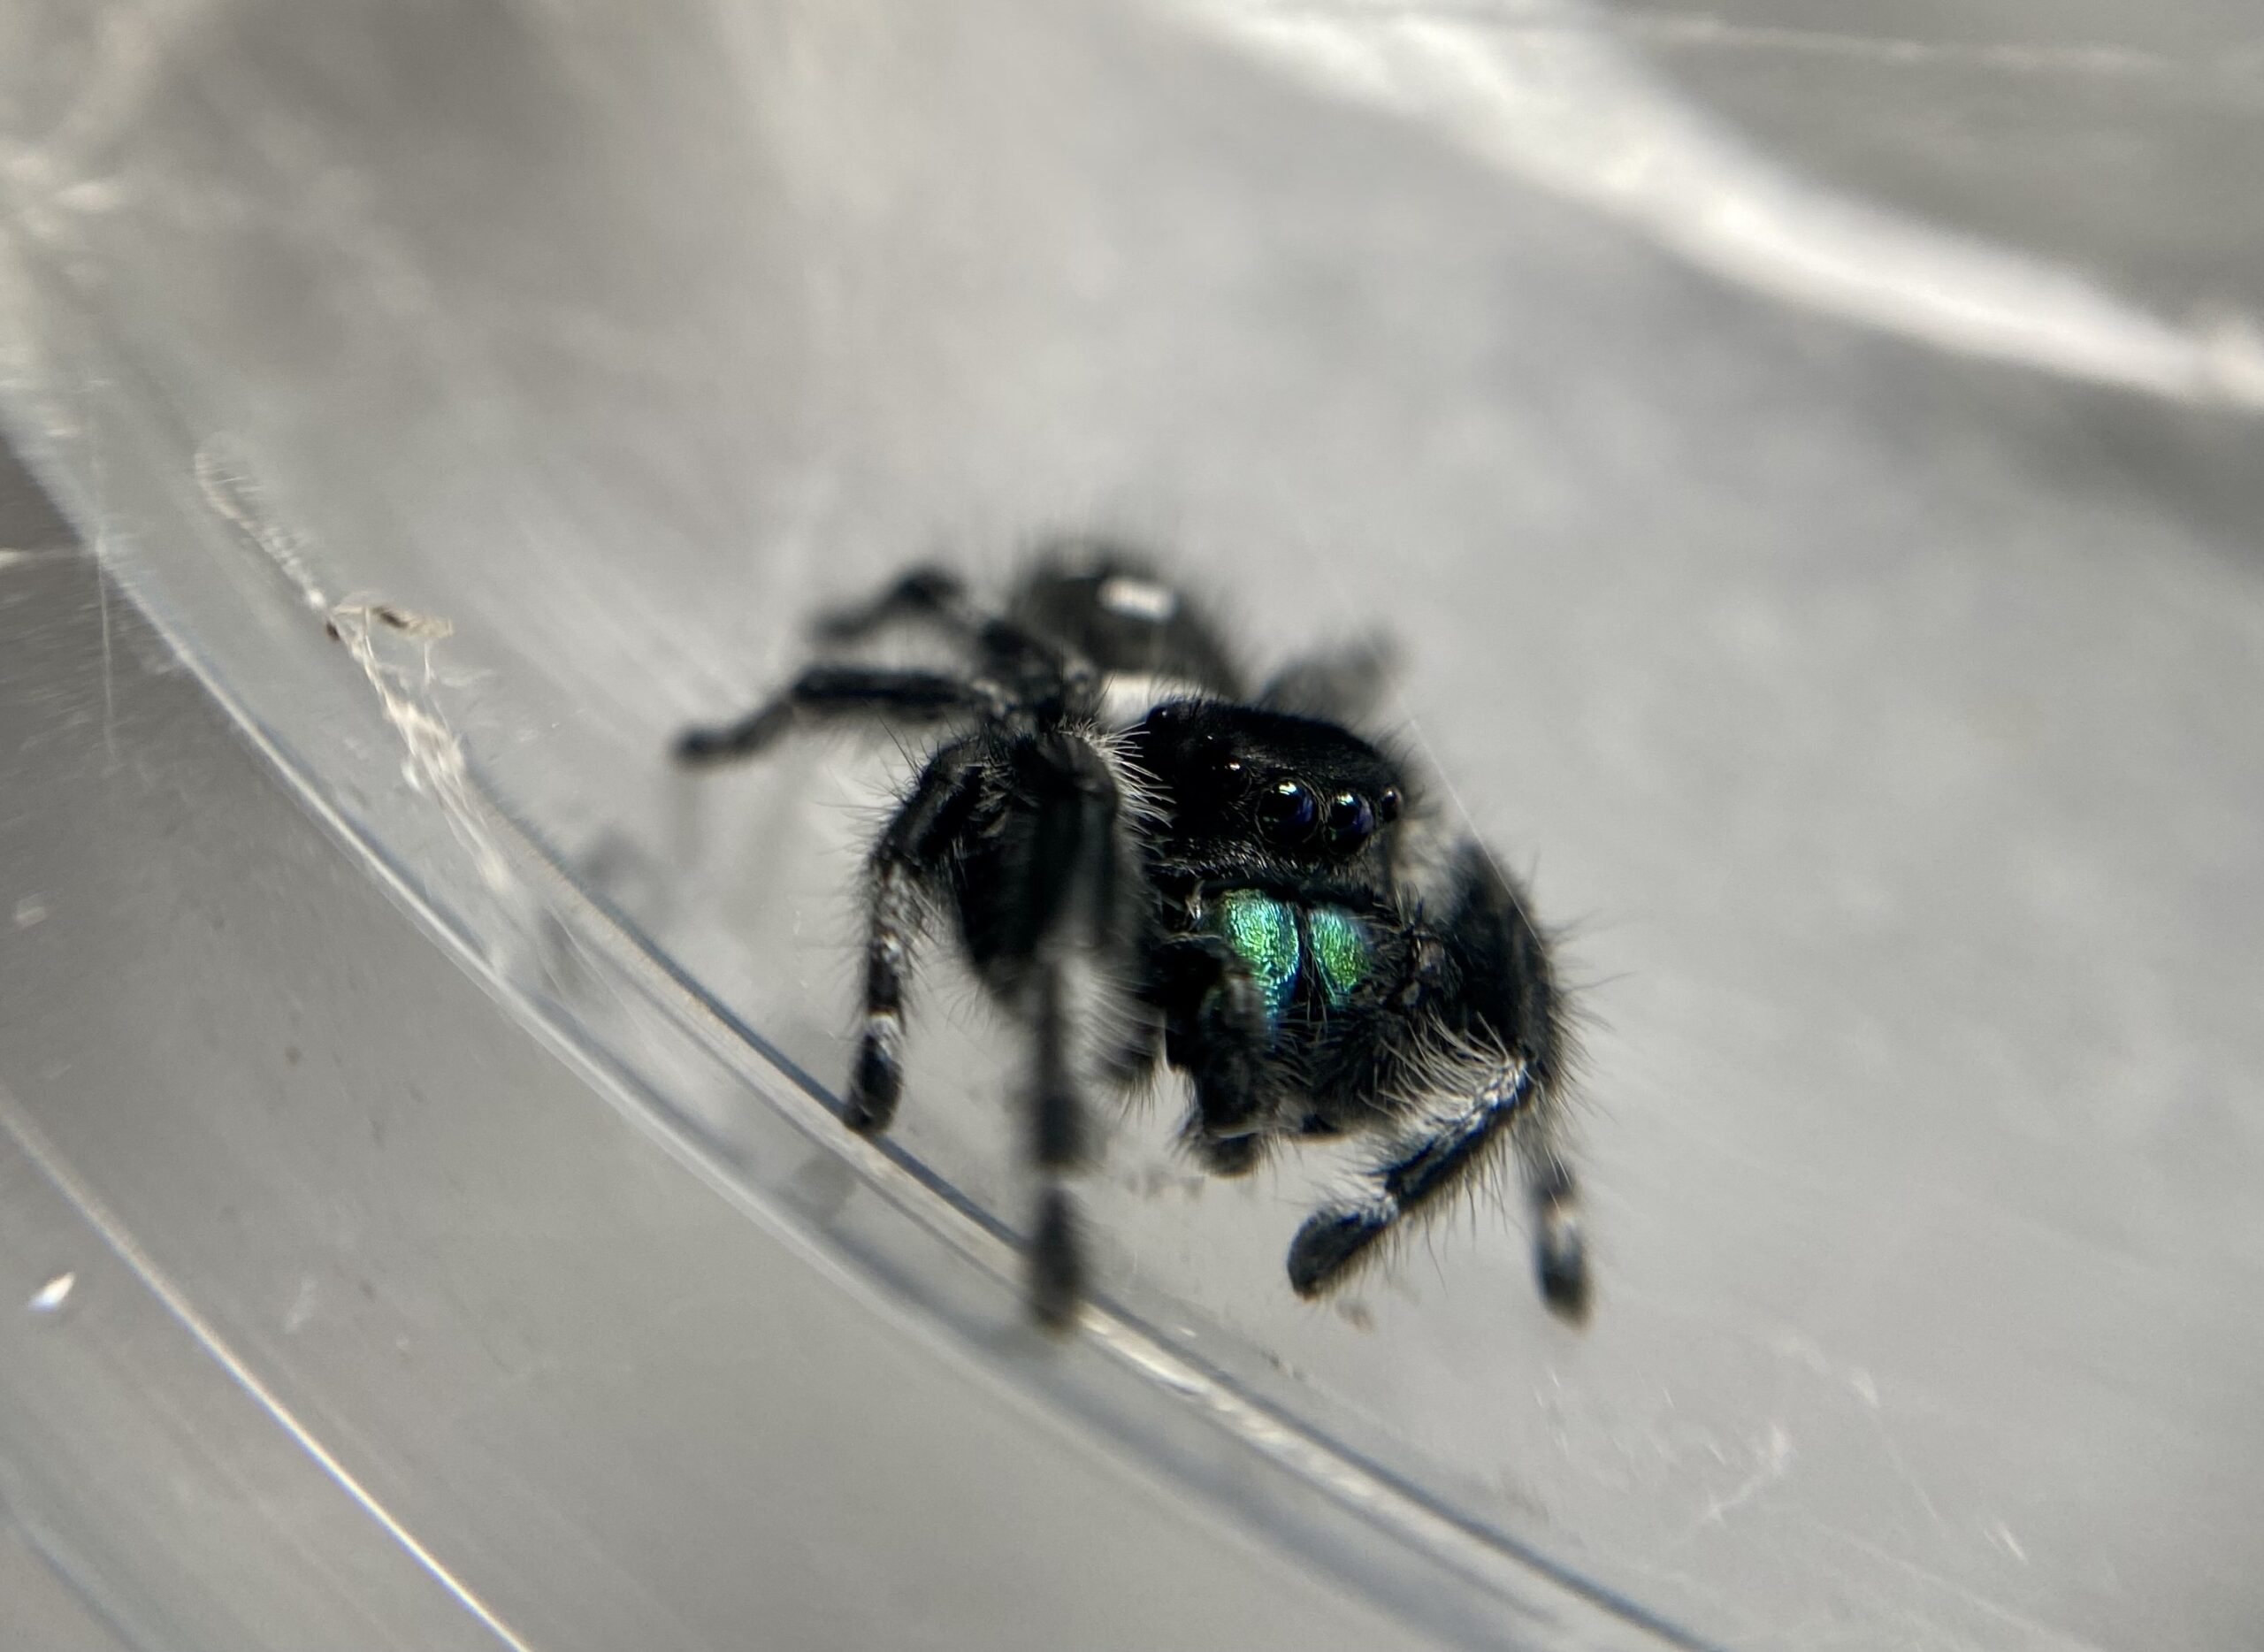 Jumping Spider Fun Facts